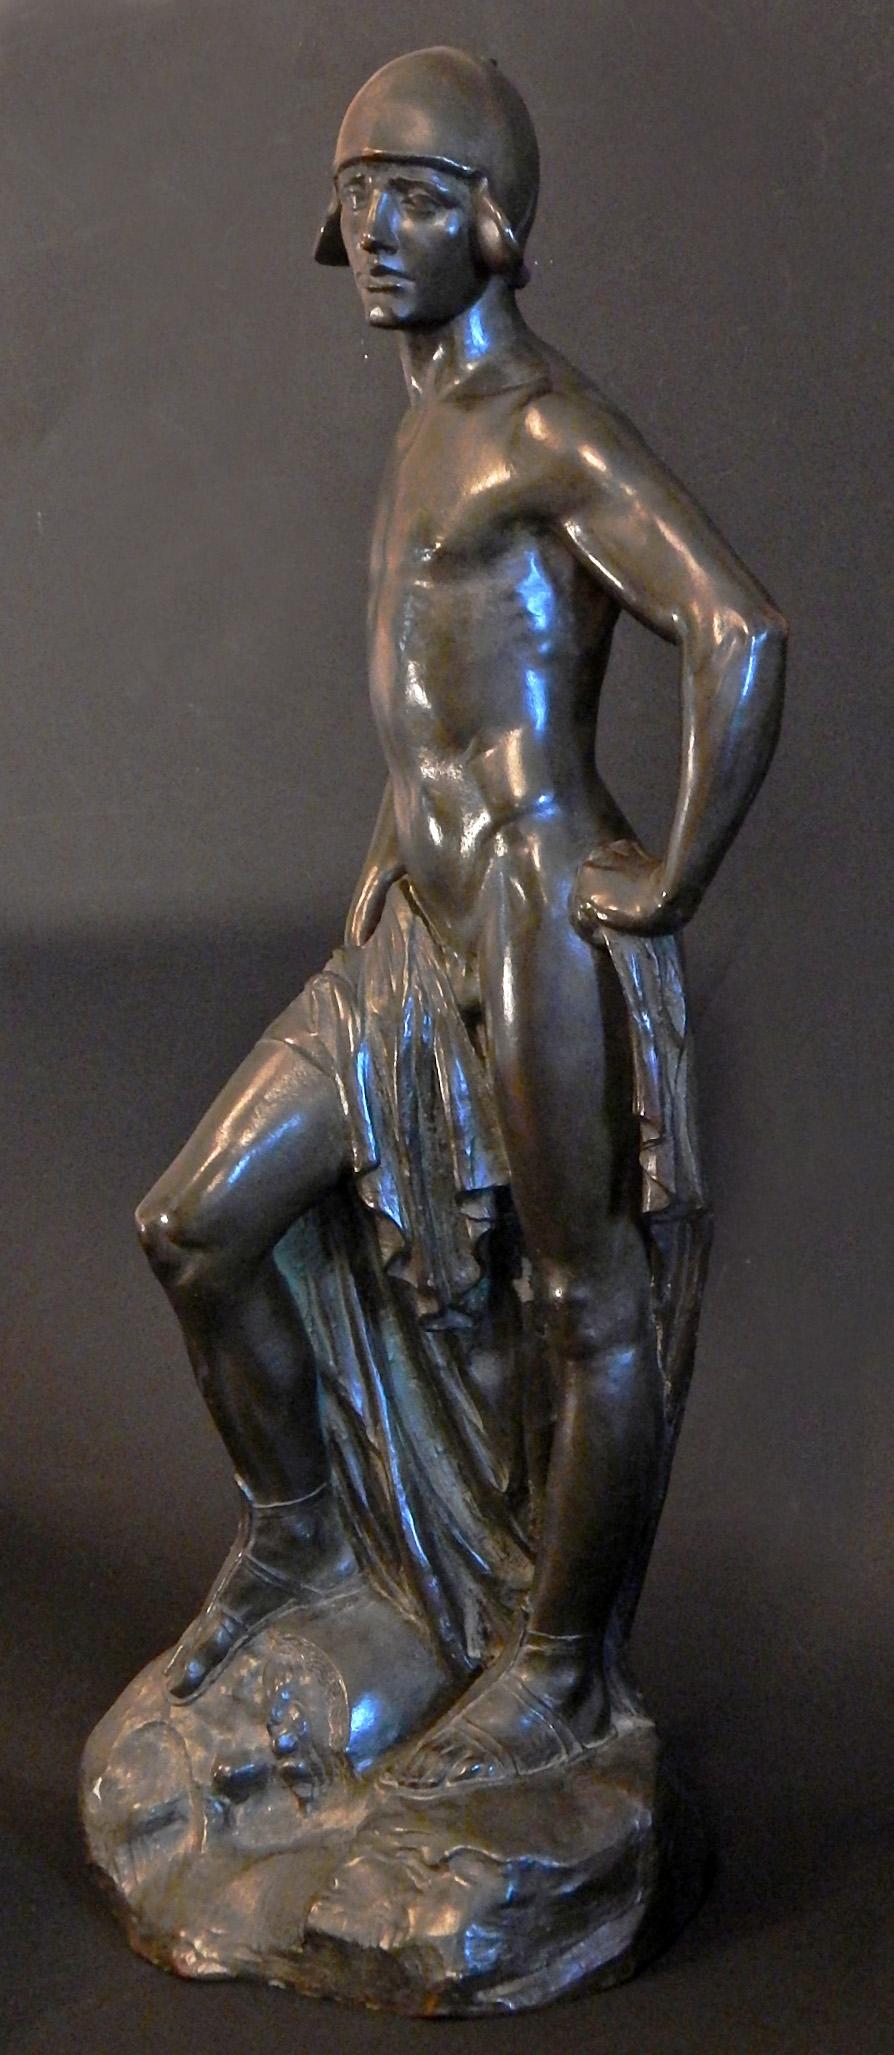 One of the most finely sculpted and executed bronzes we have ever offered, this 22-inch sculpture portrays David as a handsome, lithe young man, with a small stone in his hand, ready to hurl at Goliath. David is an enormously attractive figure, but